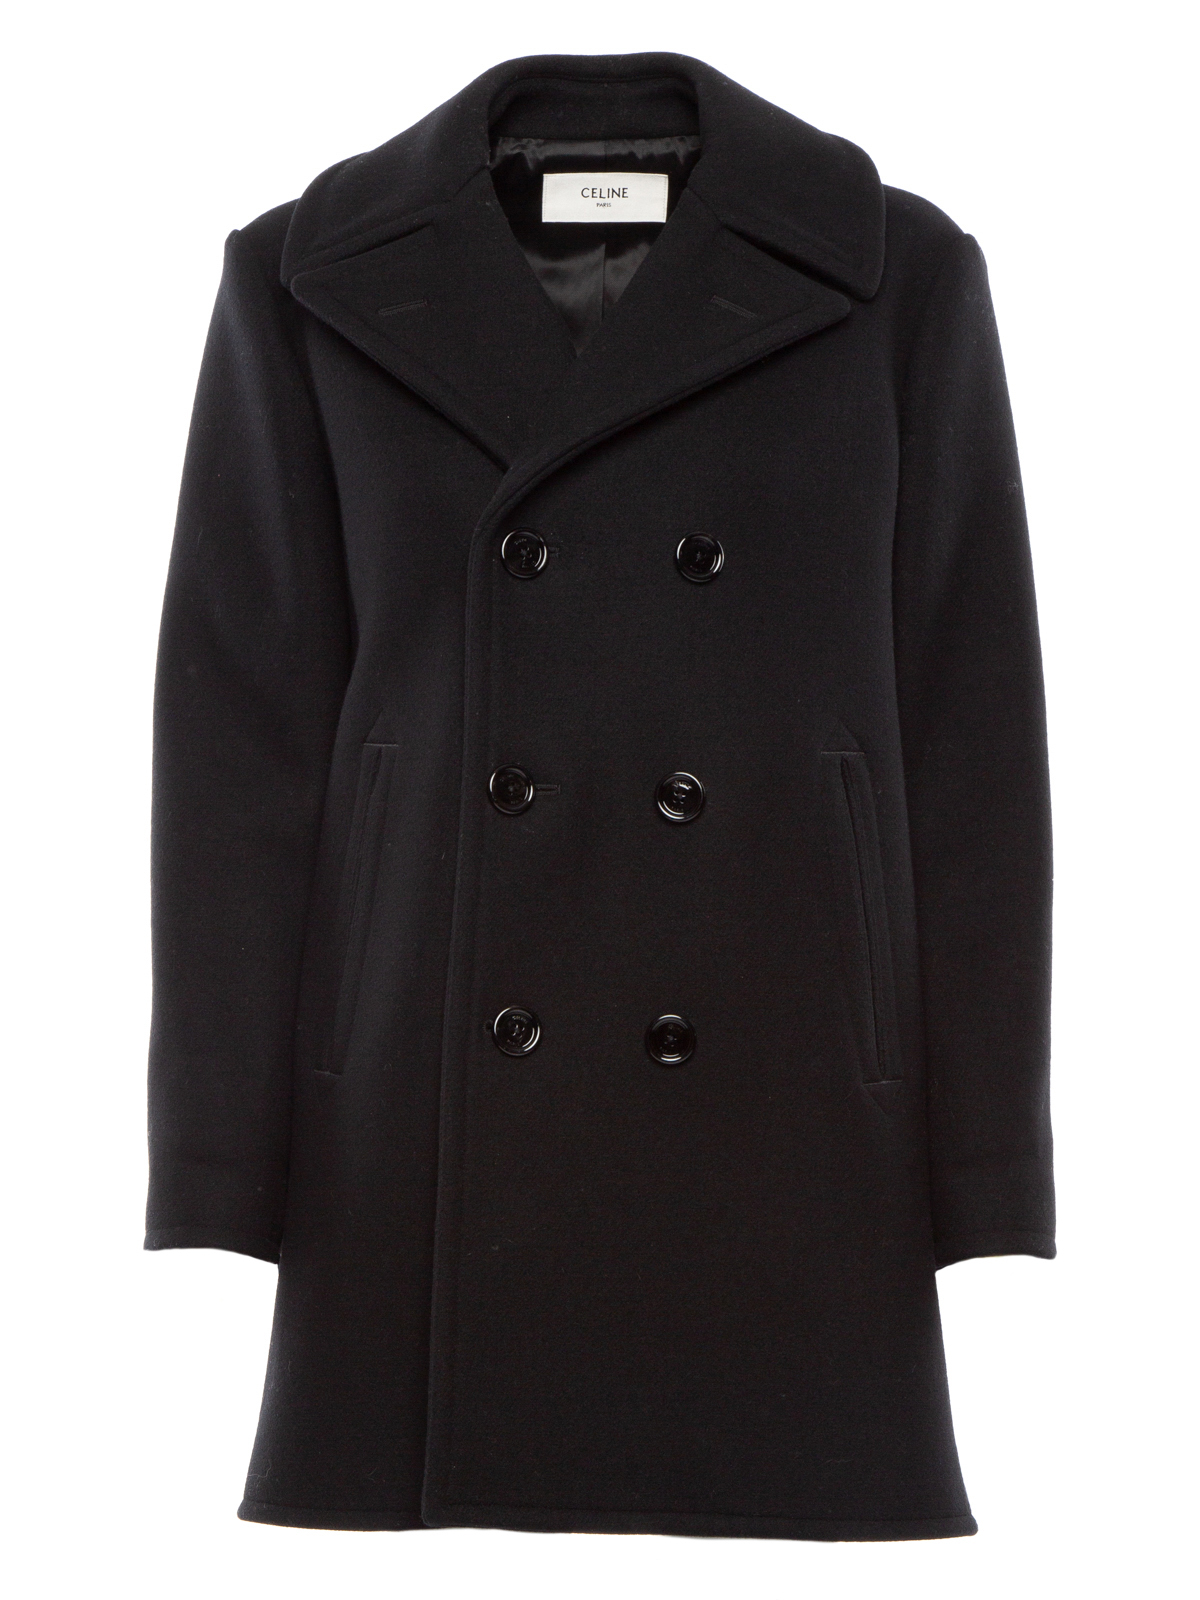 C√©line Double-Breasted Wool Coat